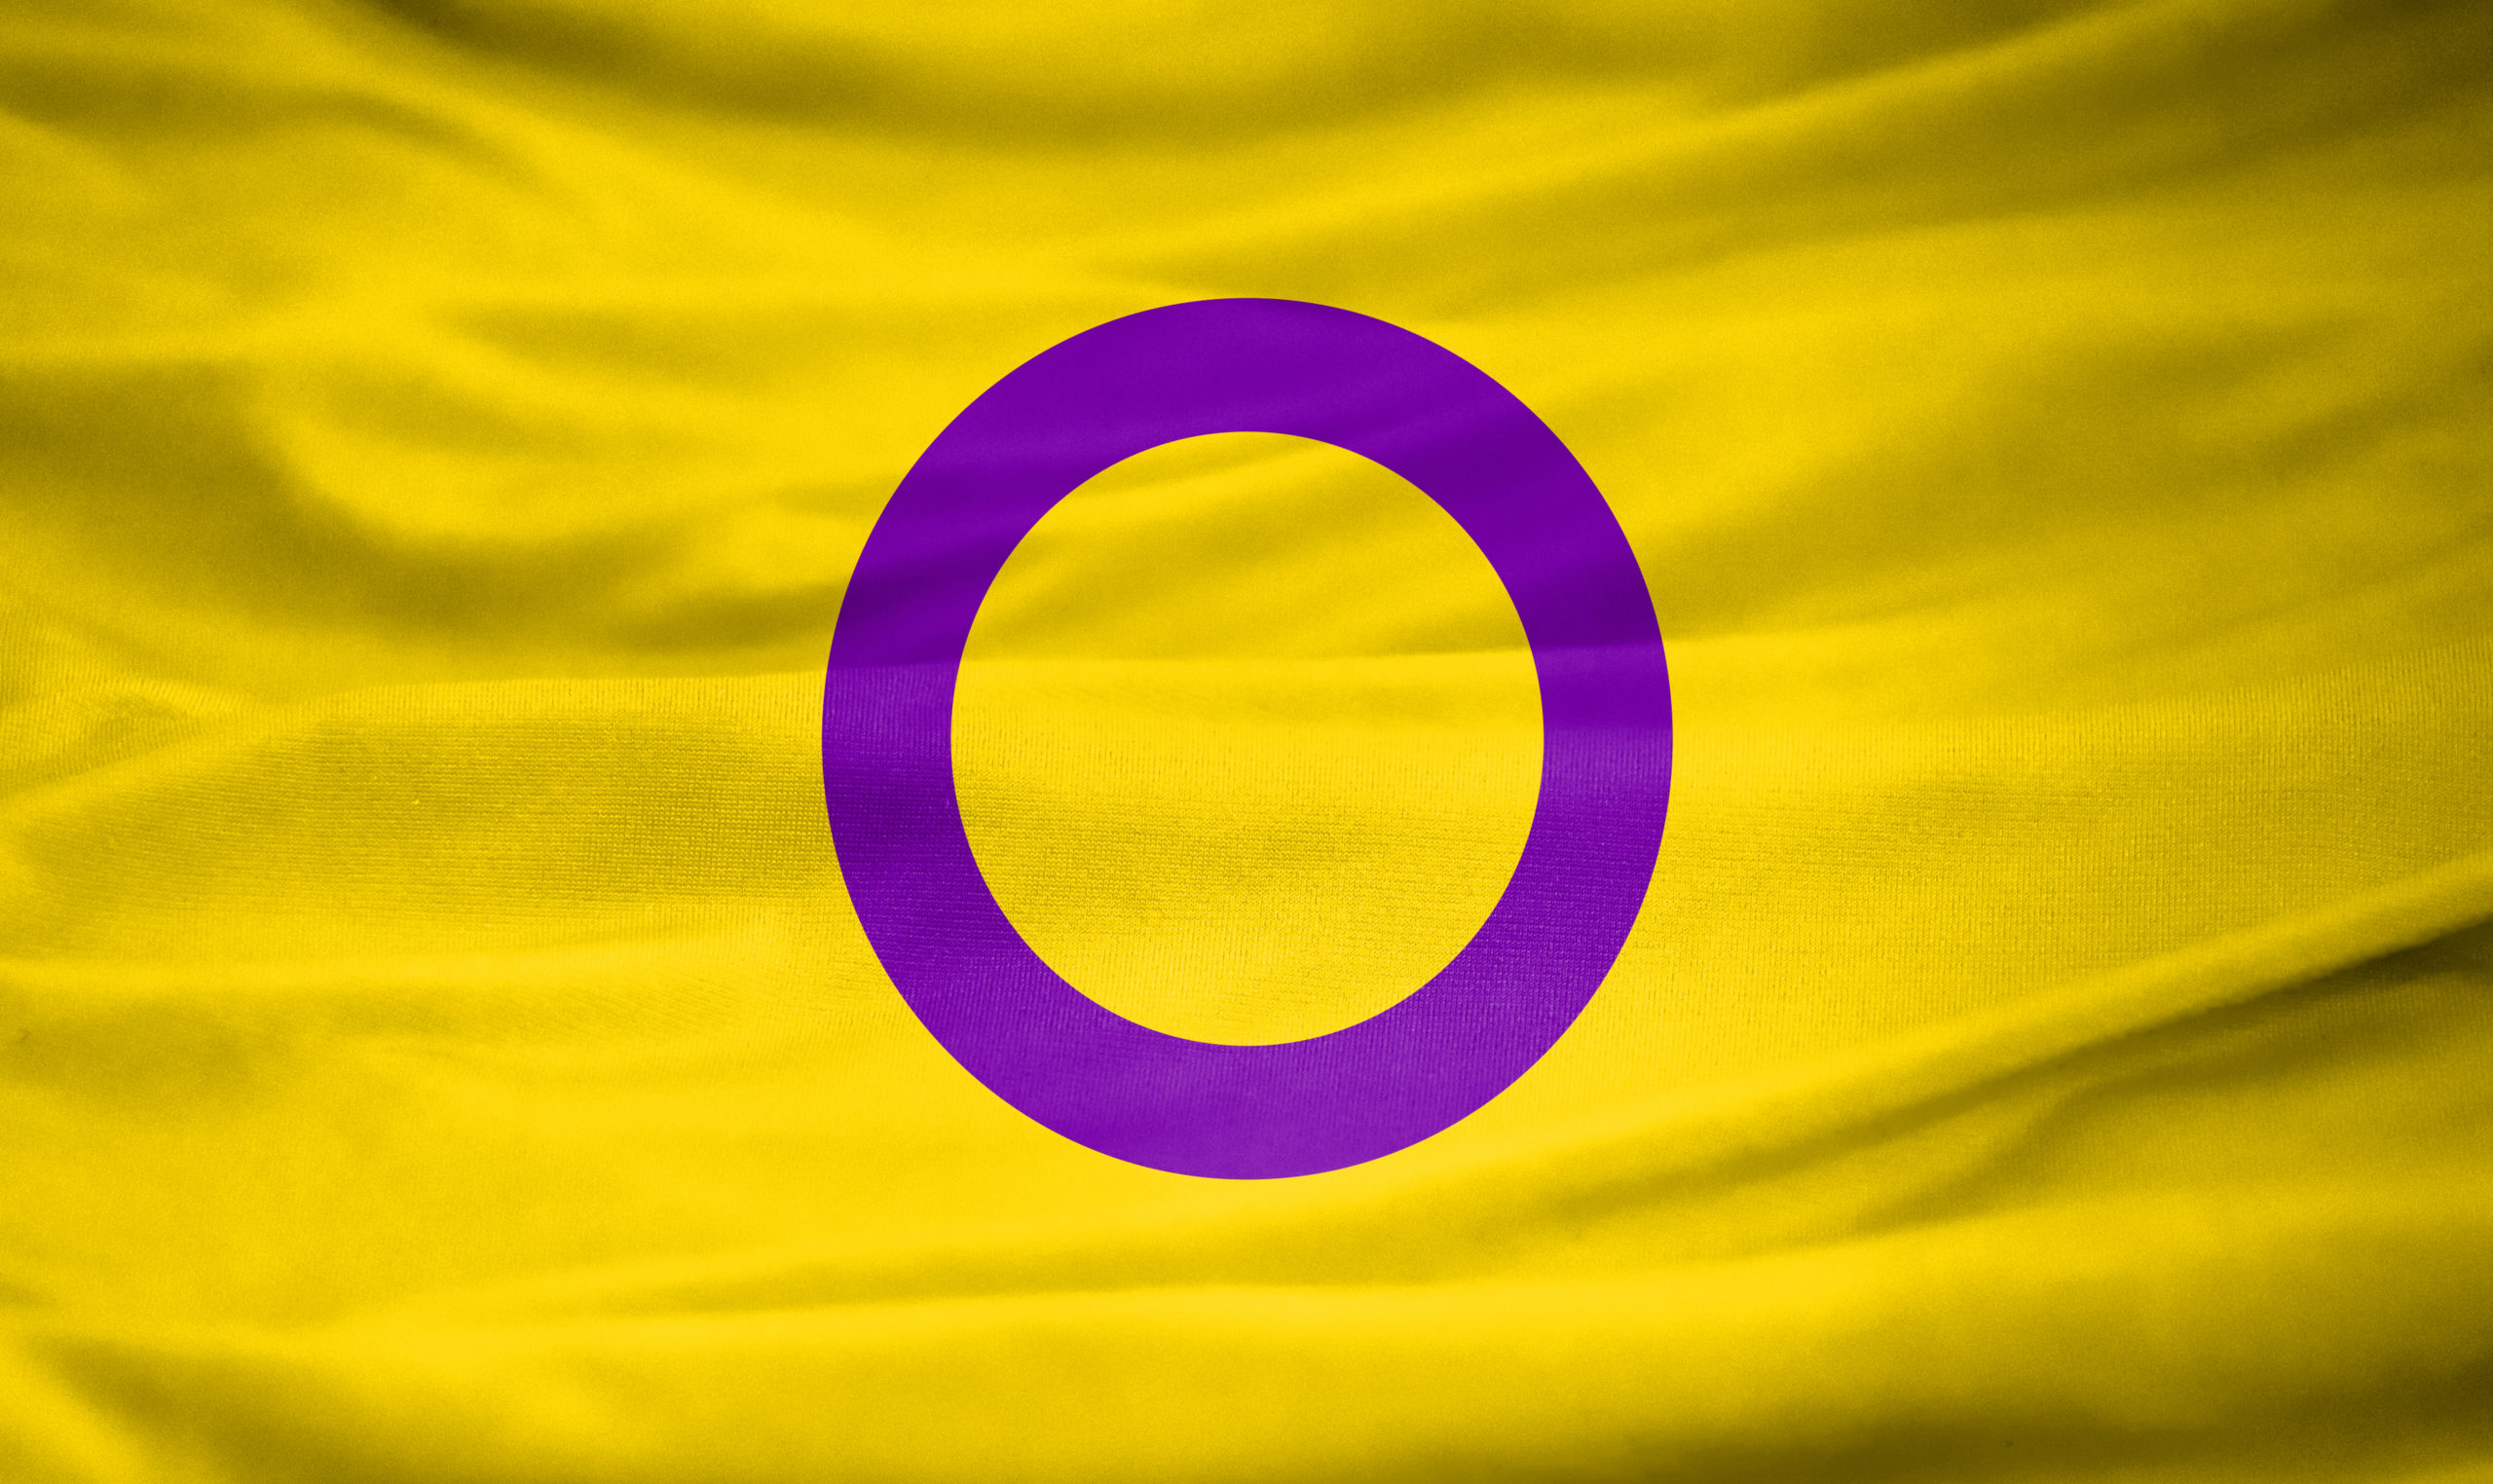 Realistic,Flag,Of,Intersex,Pride,On,The,Wavy,Surface,Of